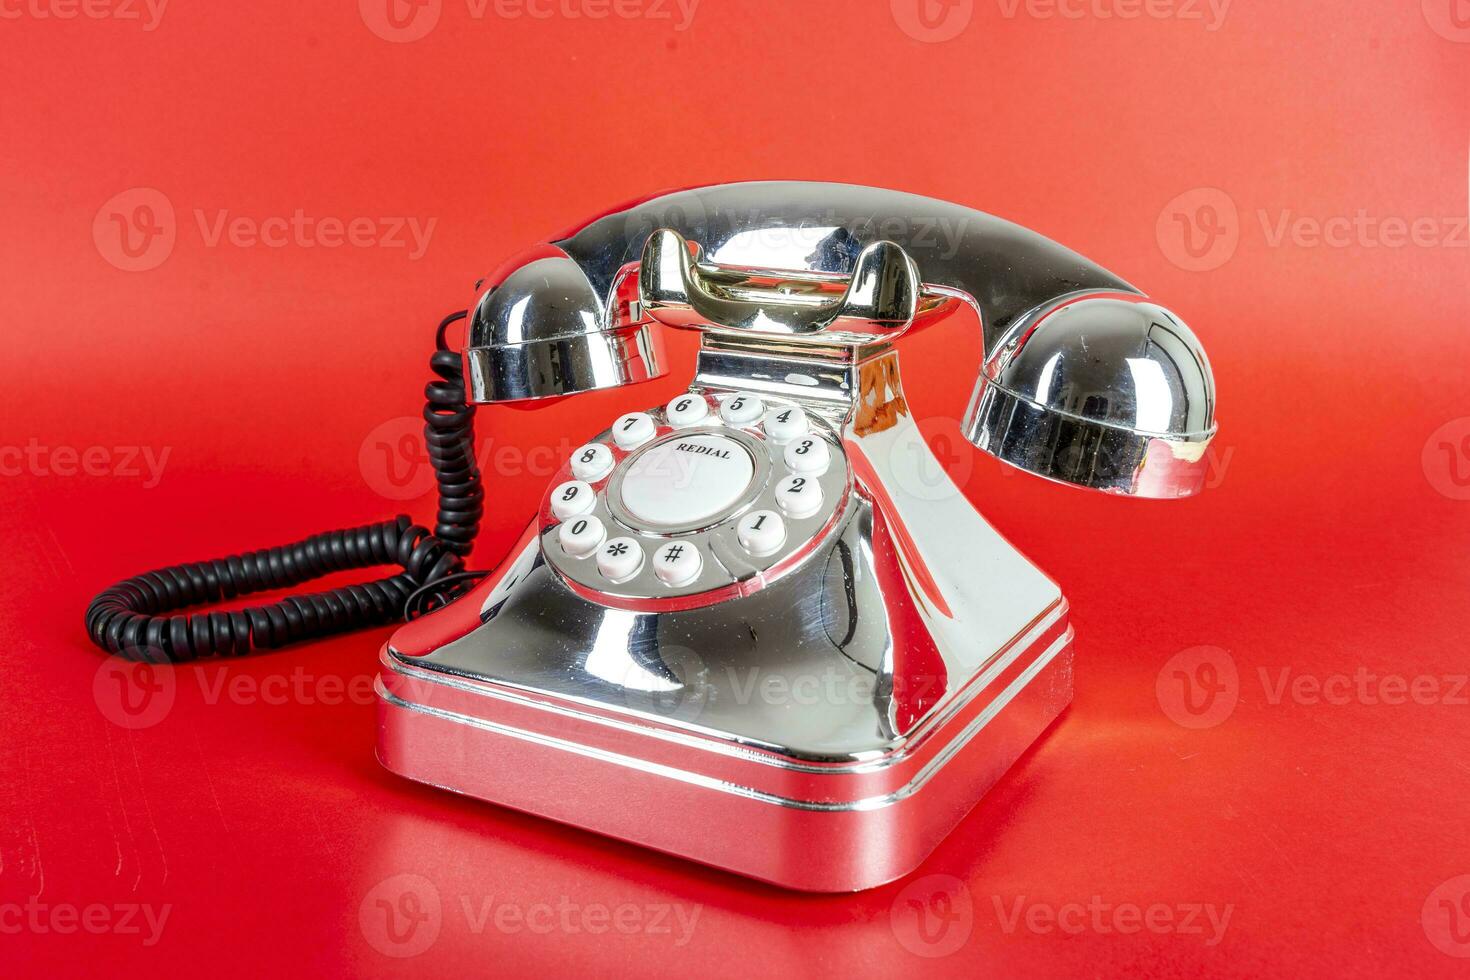 chrome vintage telephone on a red background photo